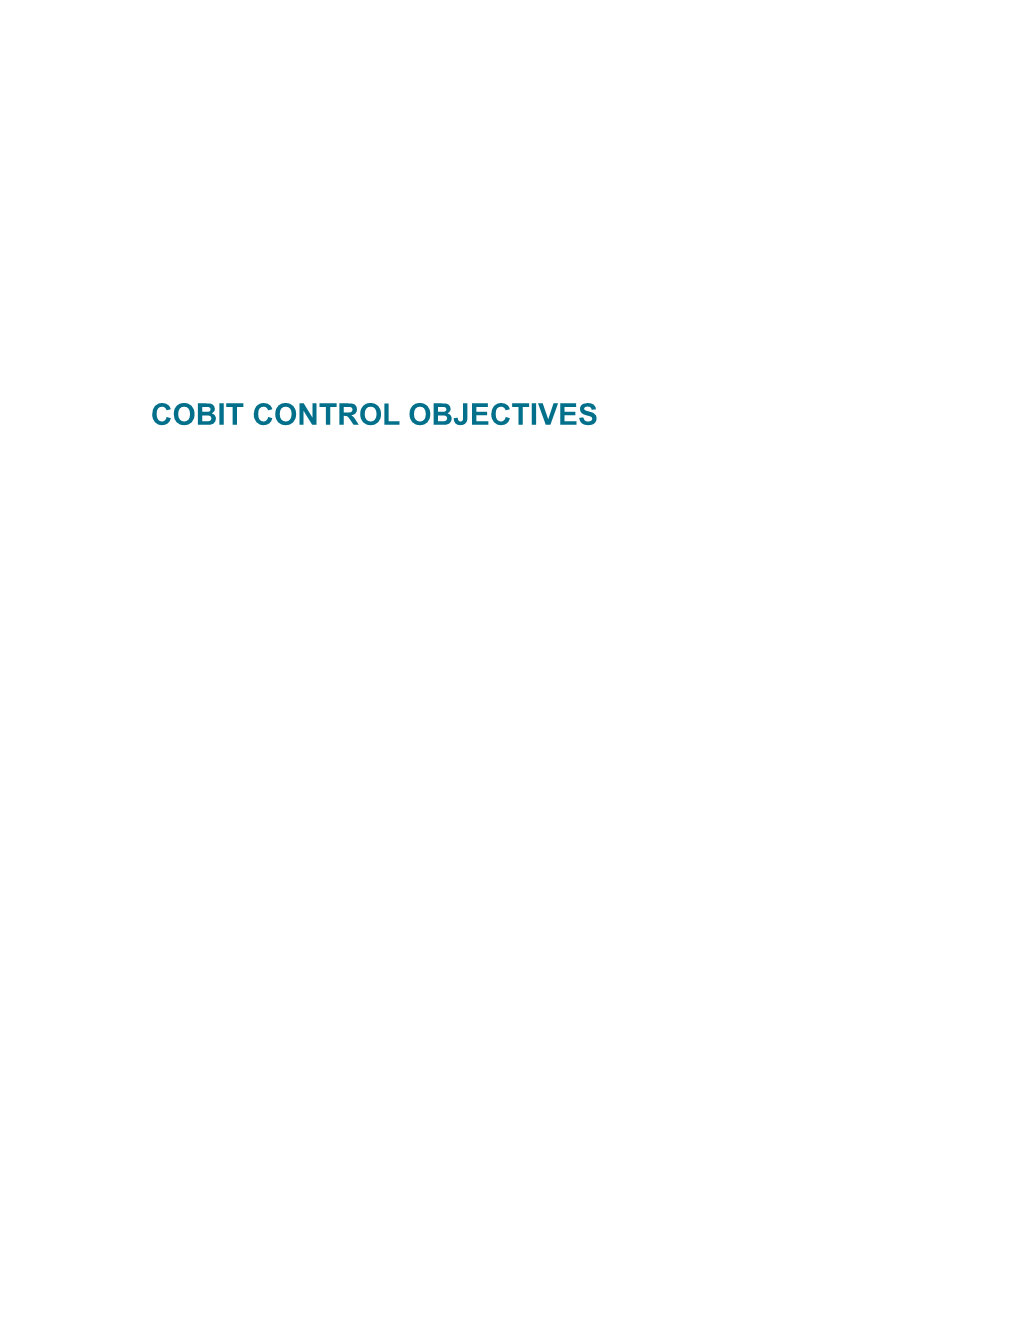 Each Of The 34 Cobit Control Objectives, Or IT Processes, Is Presented Here